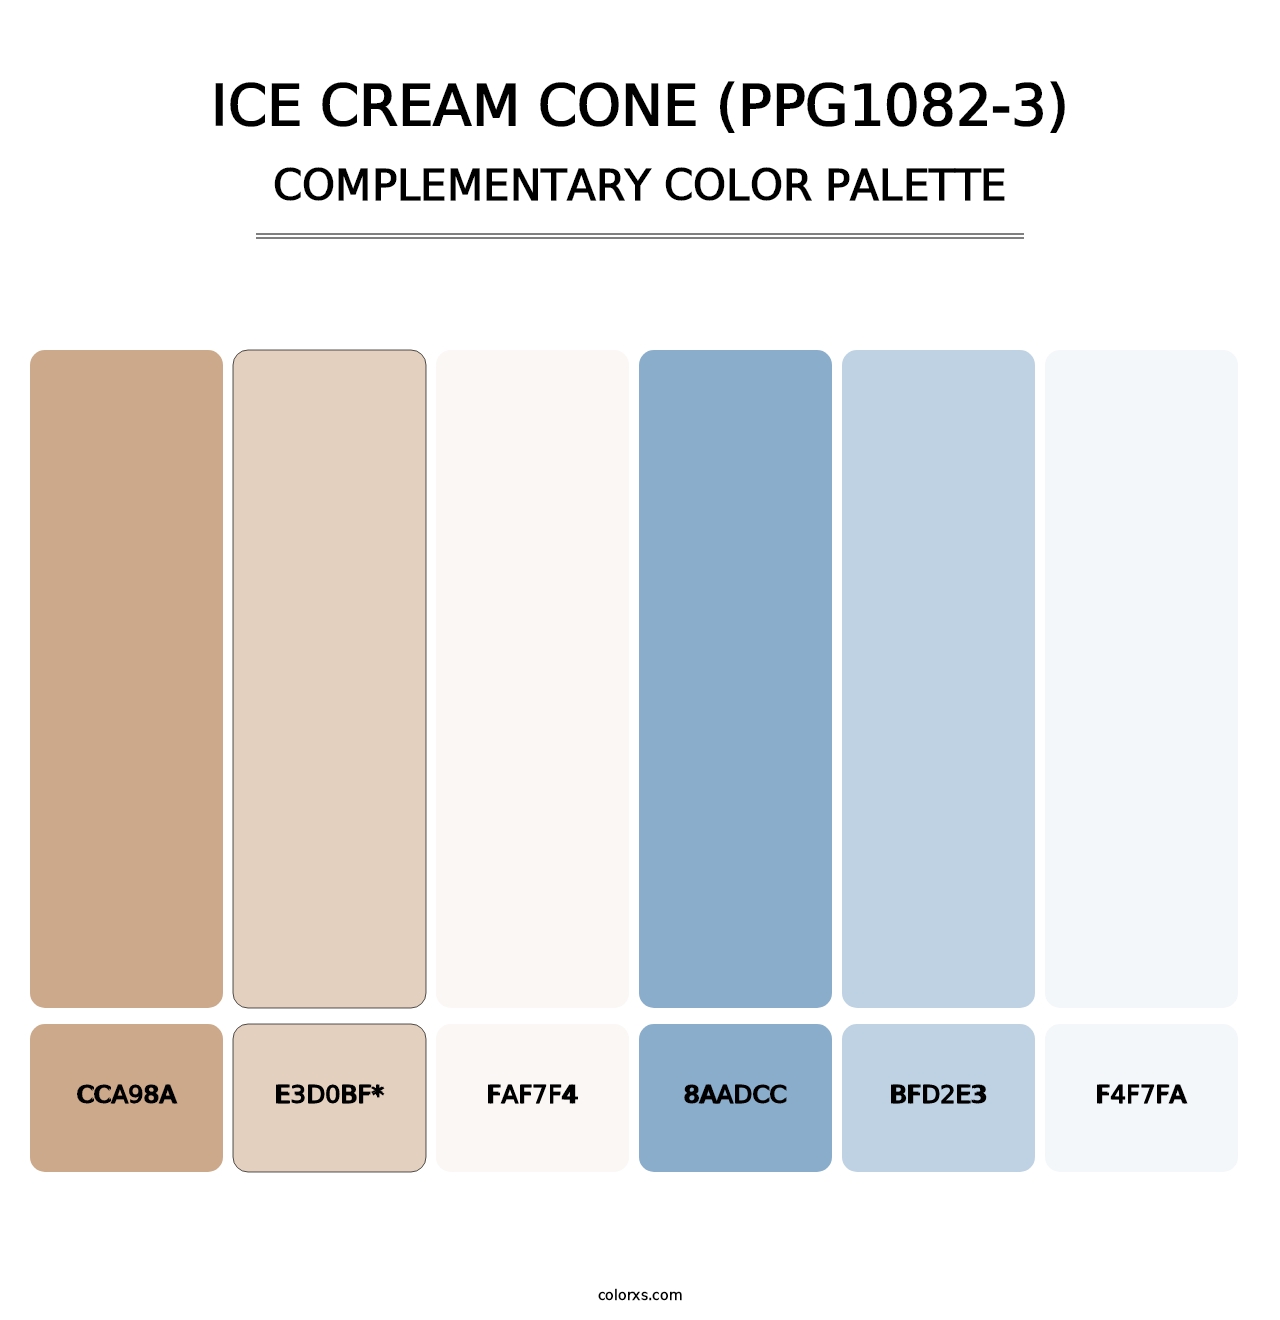 Ice Cream Cone (PPG1082-3) - Complementary Color Palette